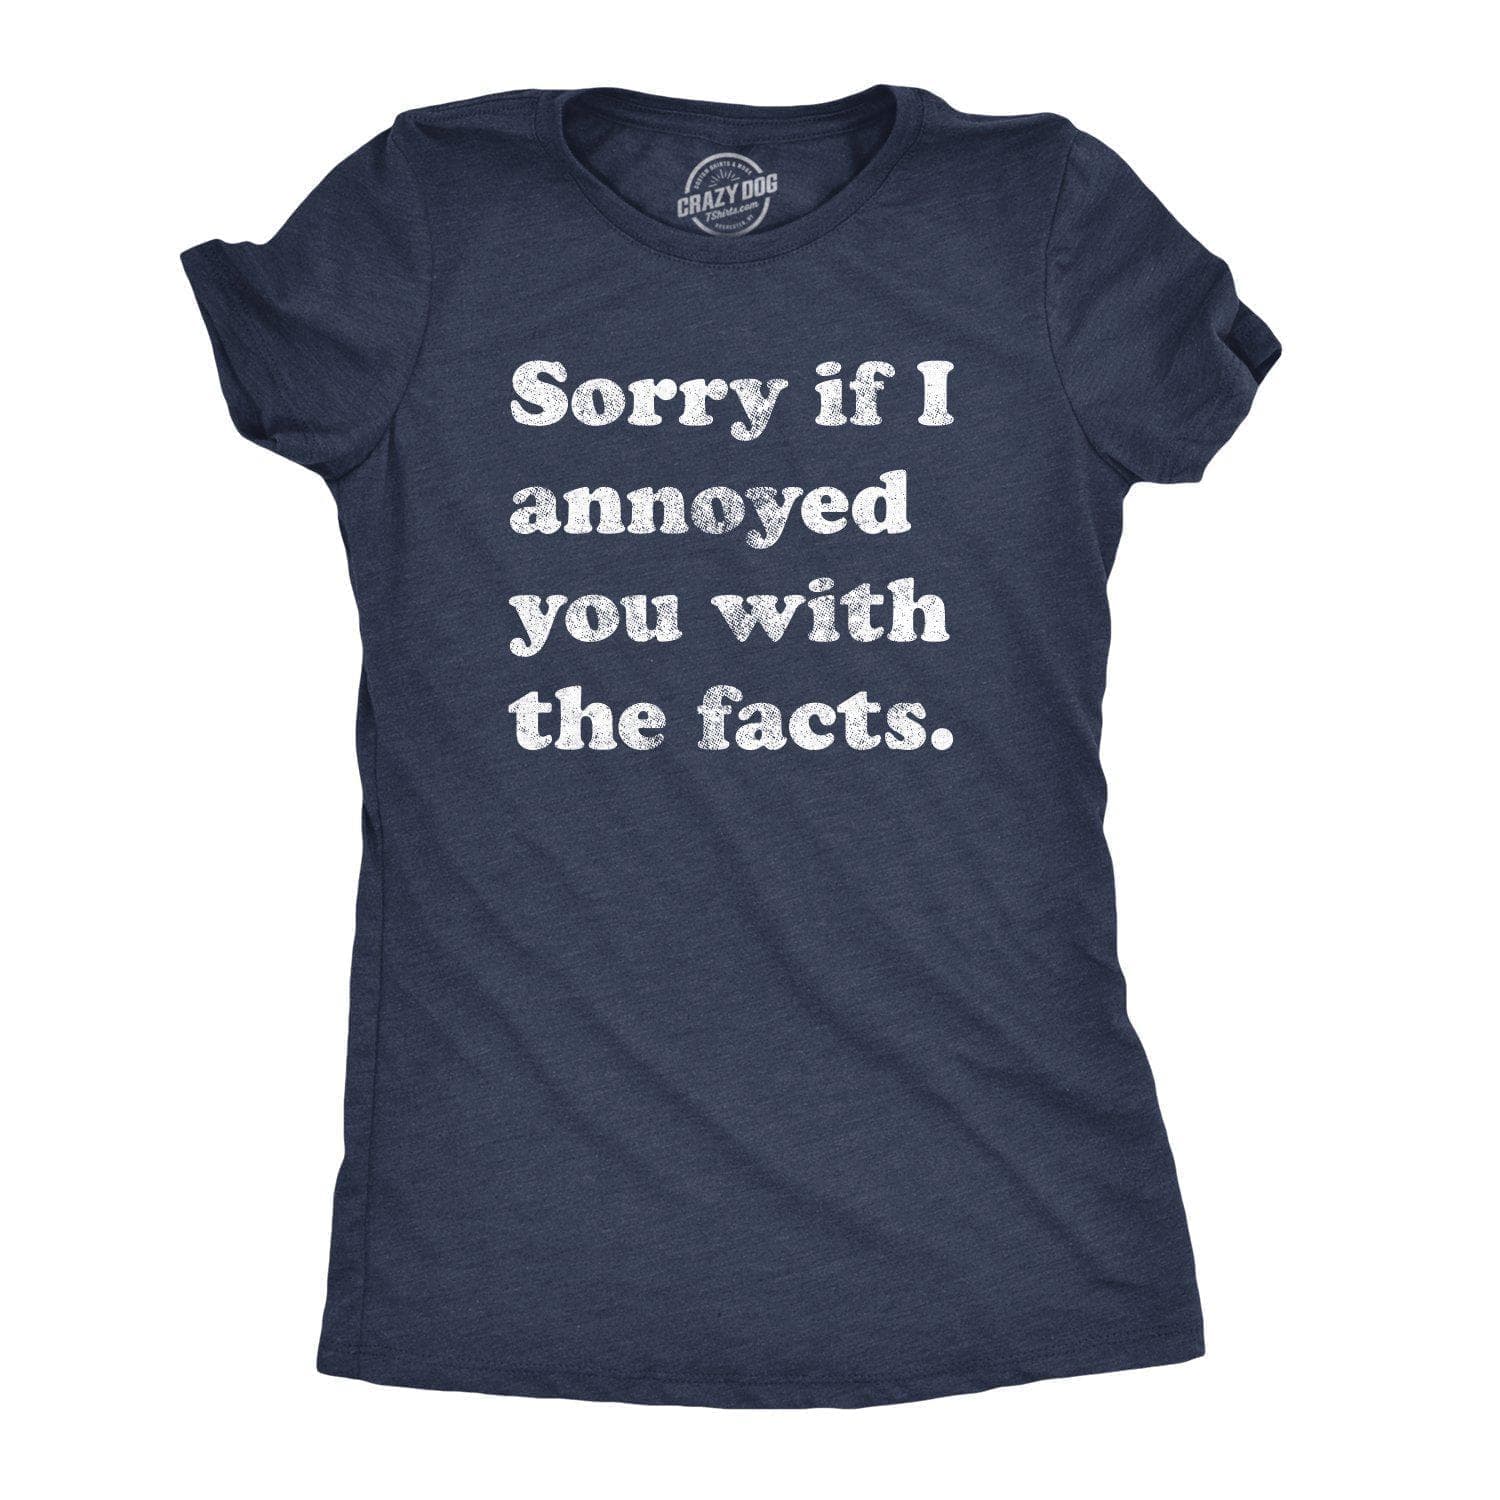 Sorry I Annoyed You With The Facts Women's Tshirt - Crazy Dog T-Shirts